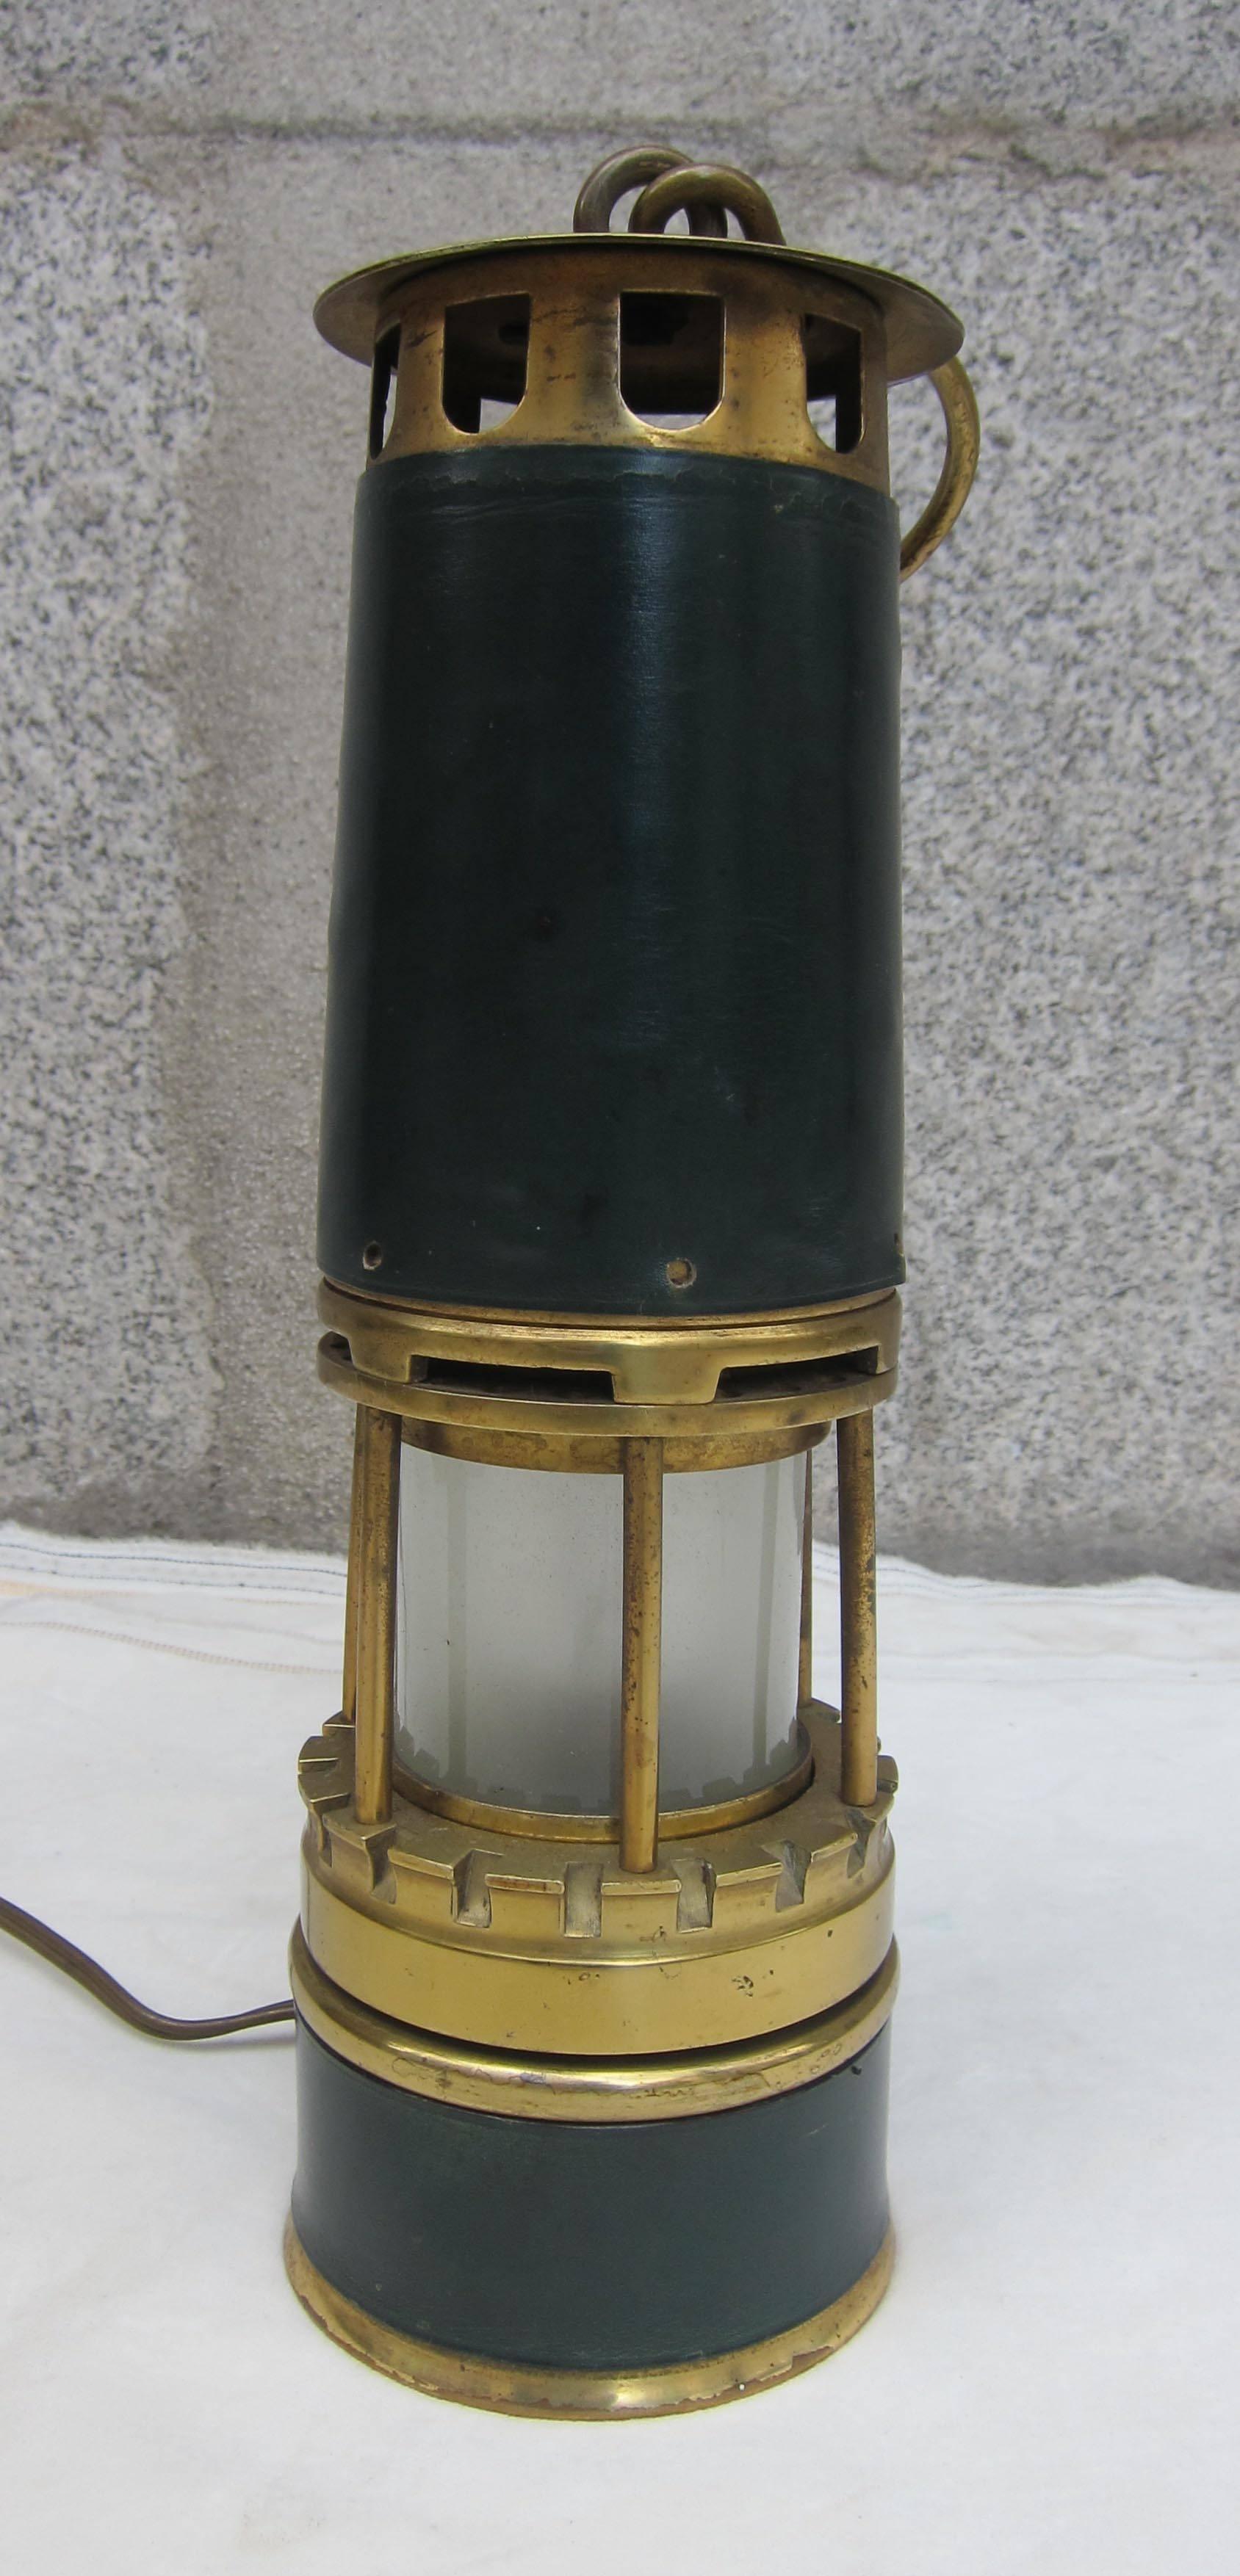 Hermes, Miner's Lamp, Brass and Leather, France, 1960 For Sale 2